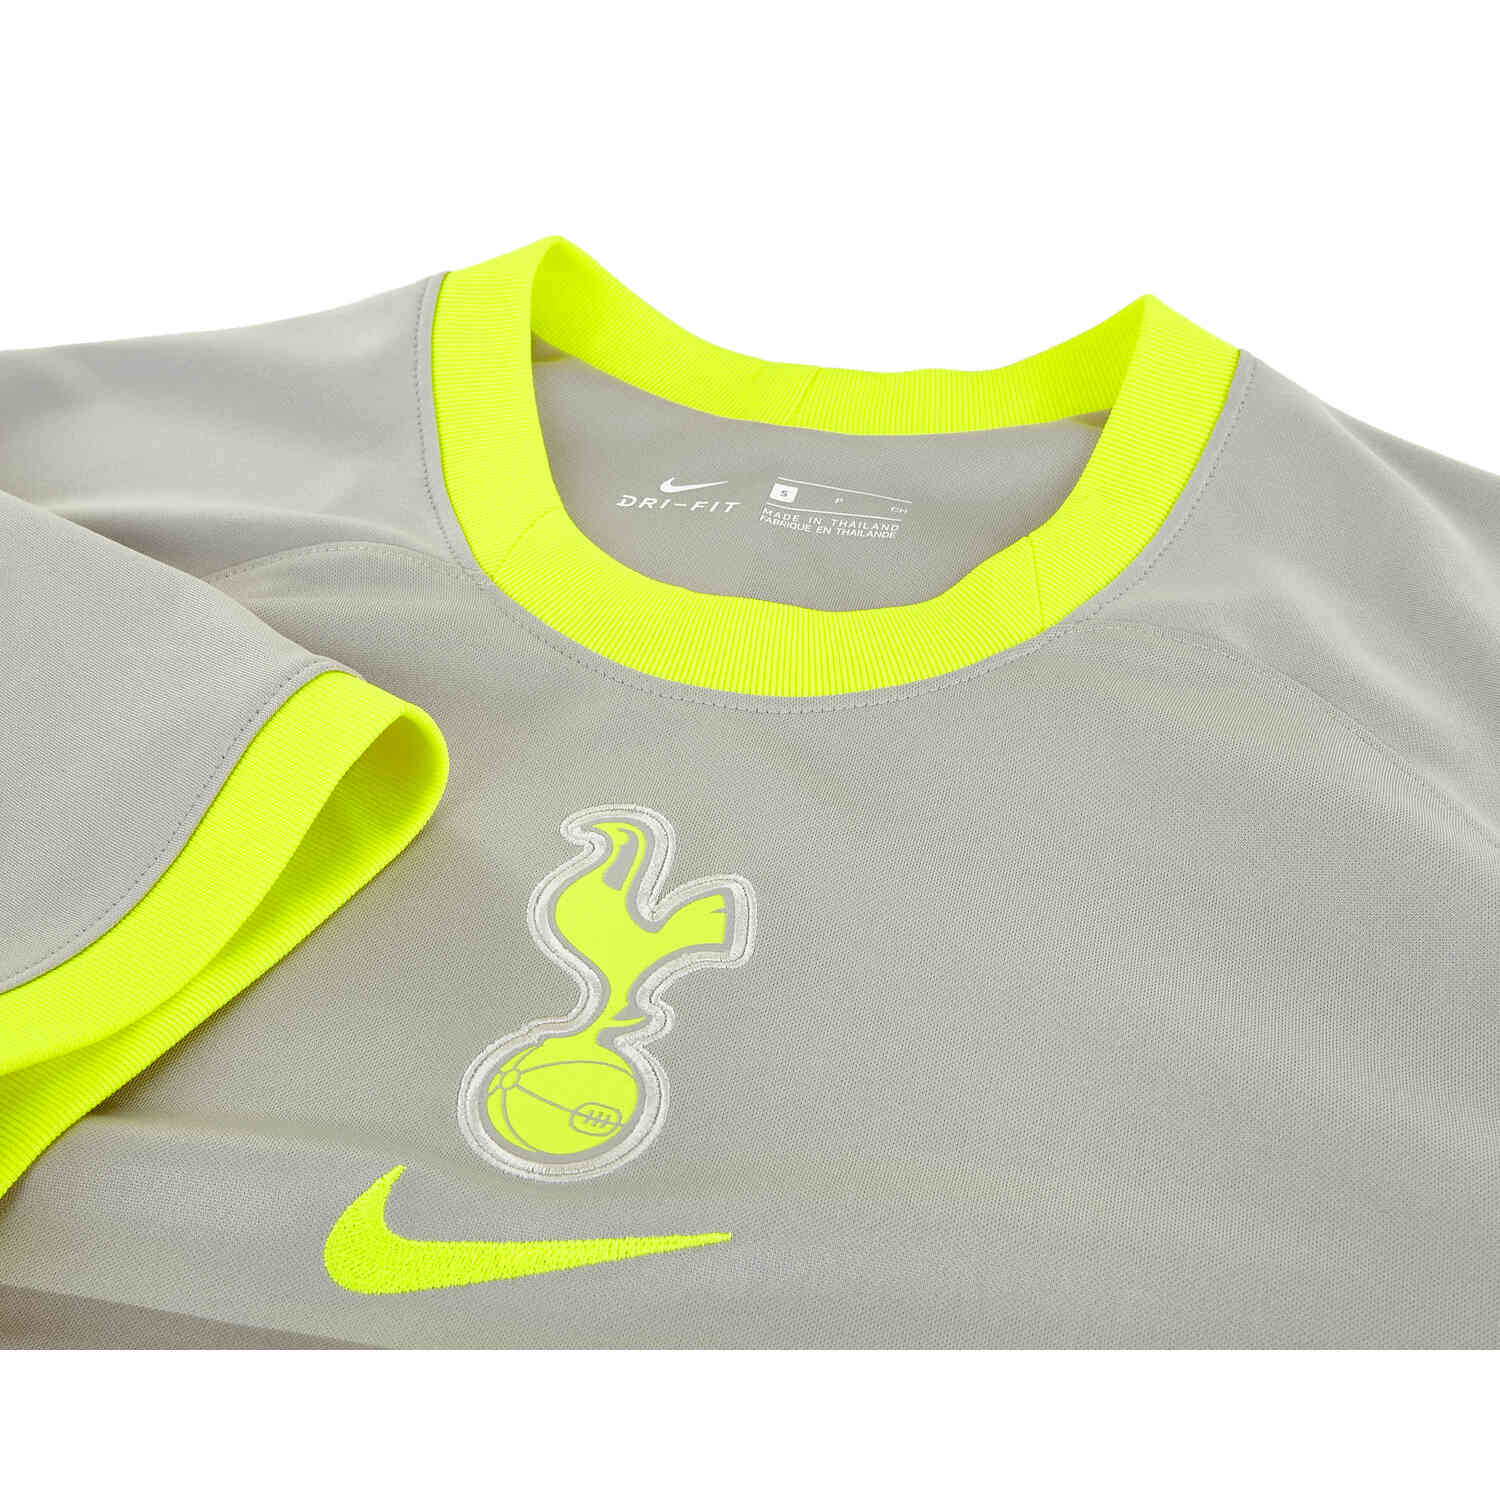 Tottenham's 20-21 3rd & 4th kit inspired by classic Air Max